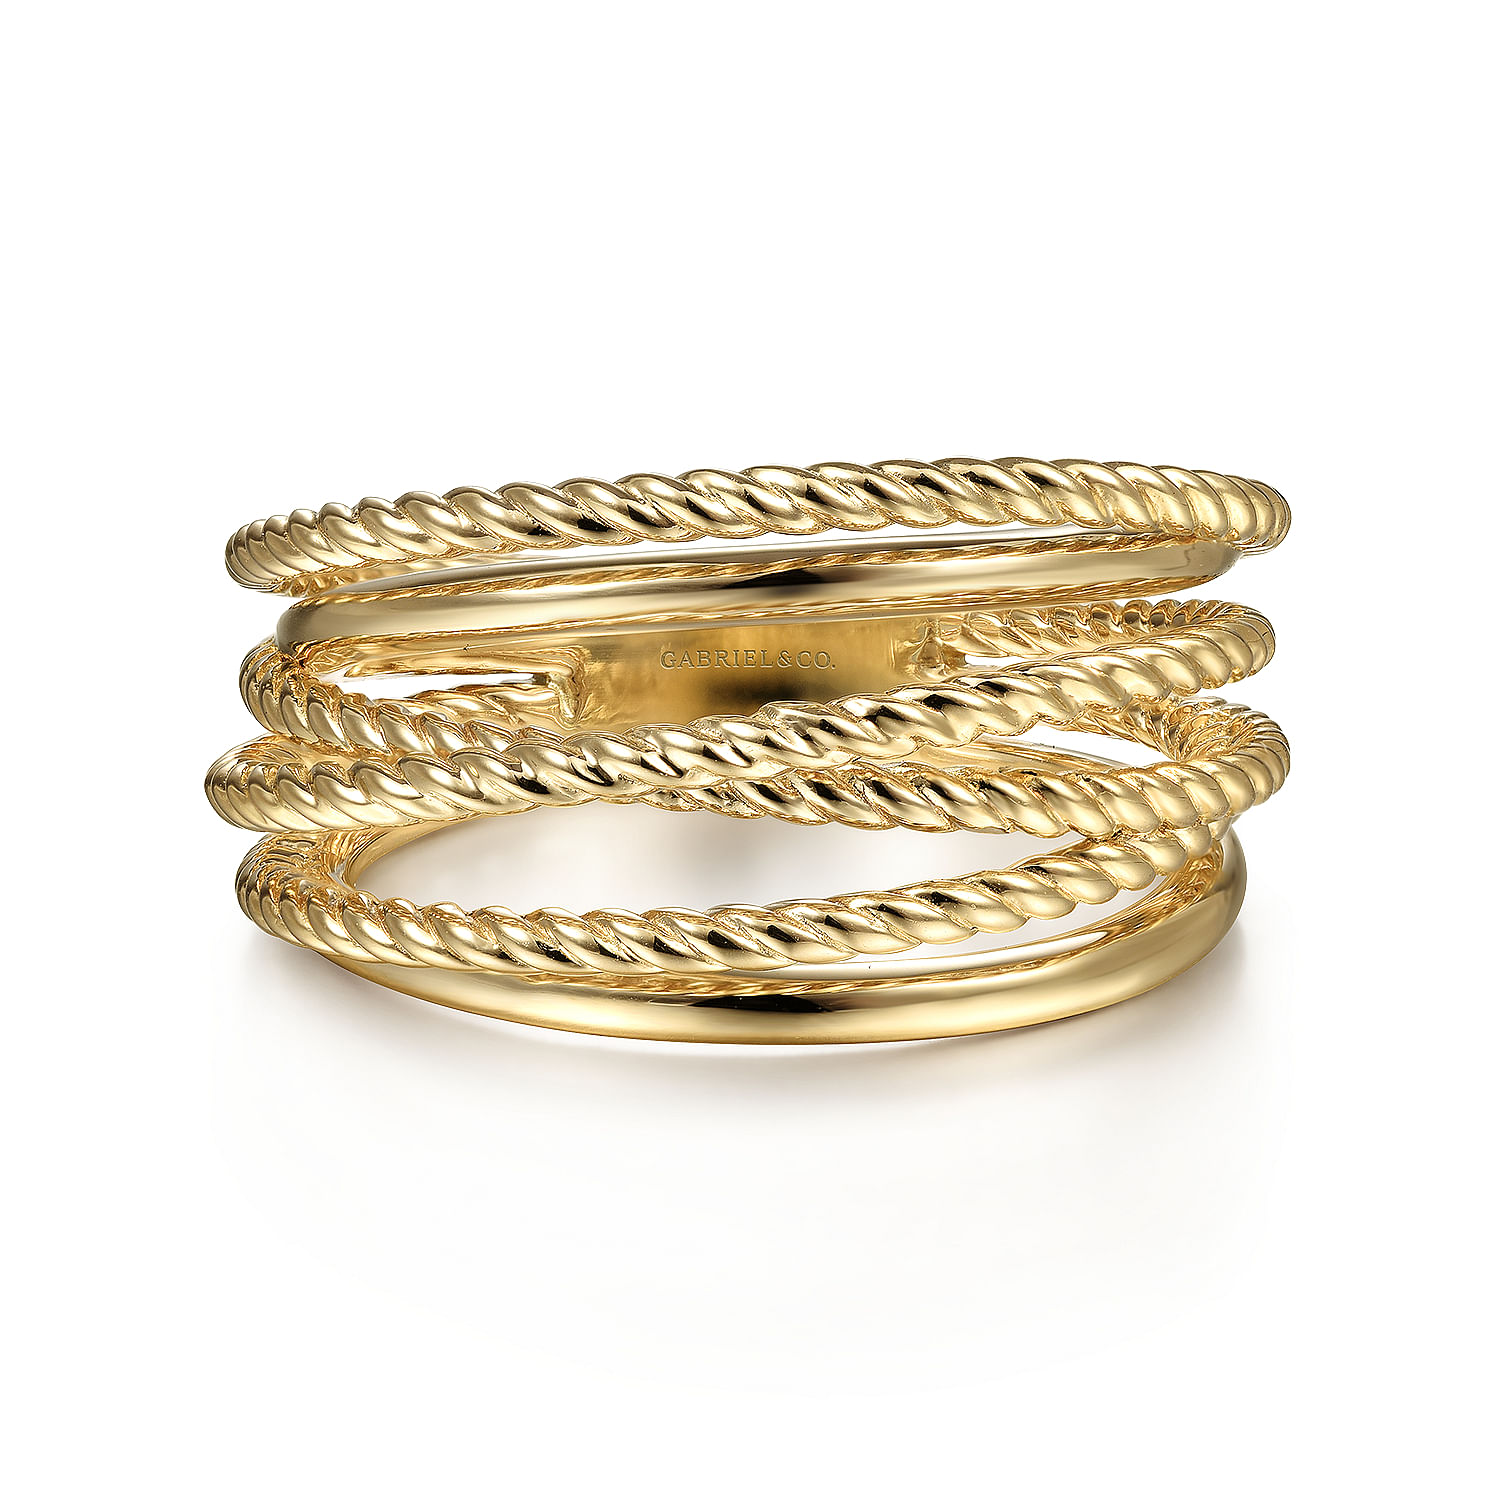 14K Yellow Gold Wide Intersecting Twisted Rope Ring